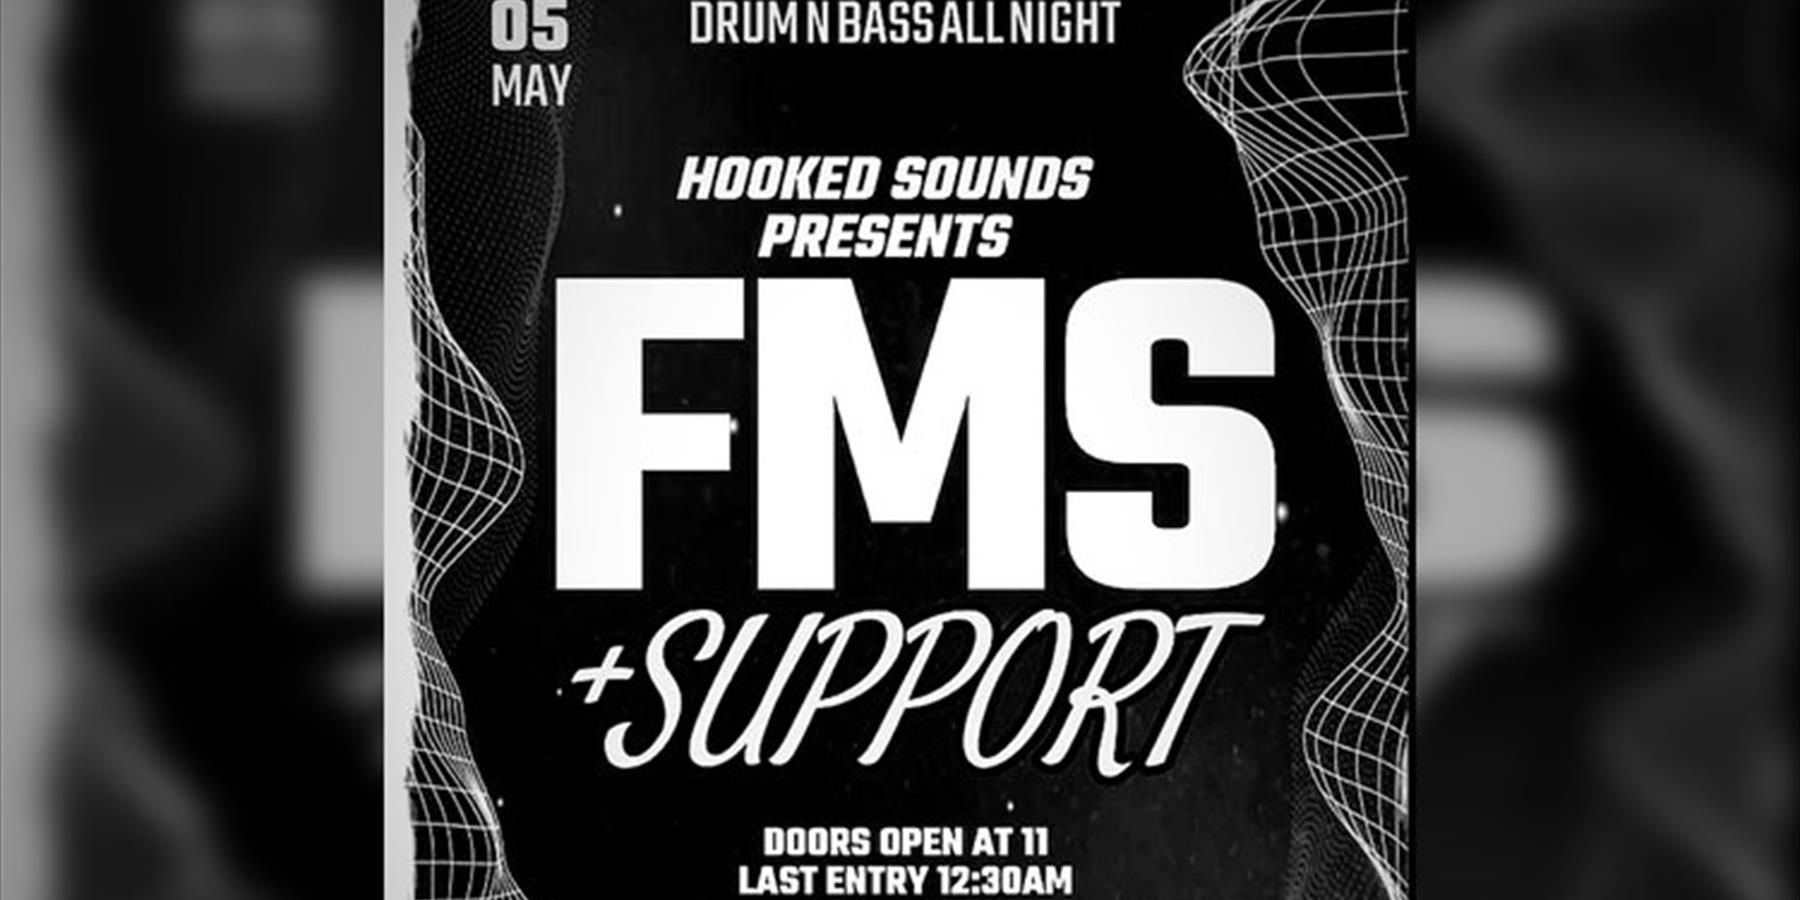 Hooked Presents FMS + Support (DNB ALL NIGHT)